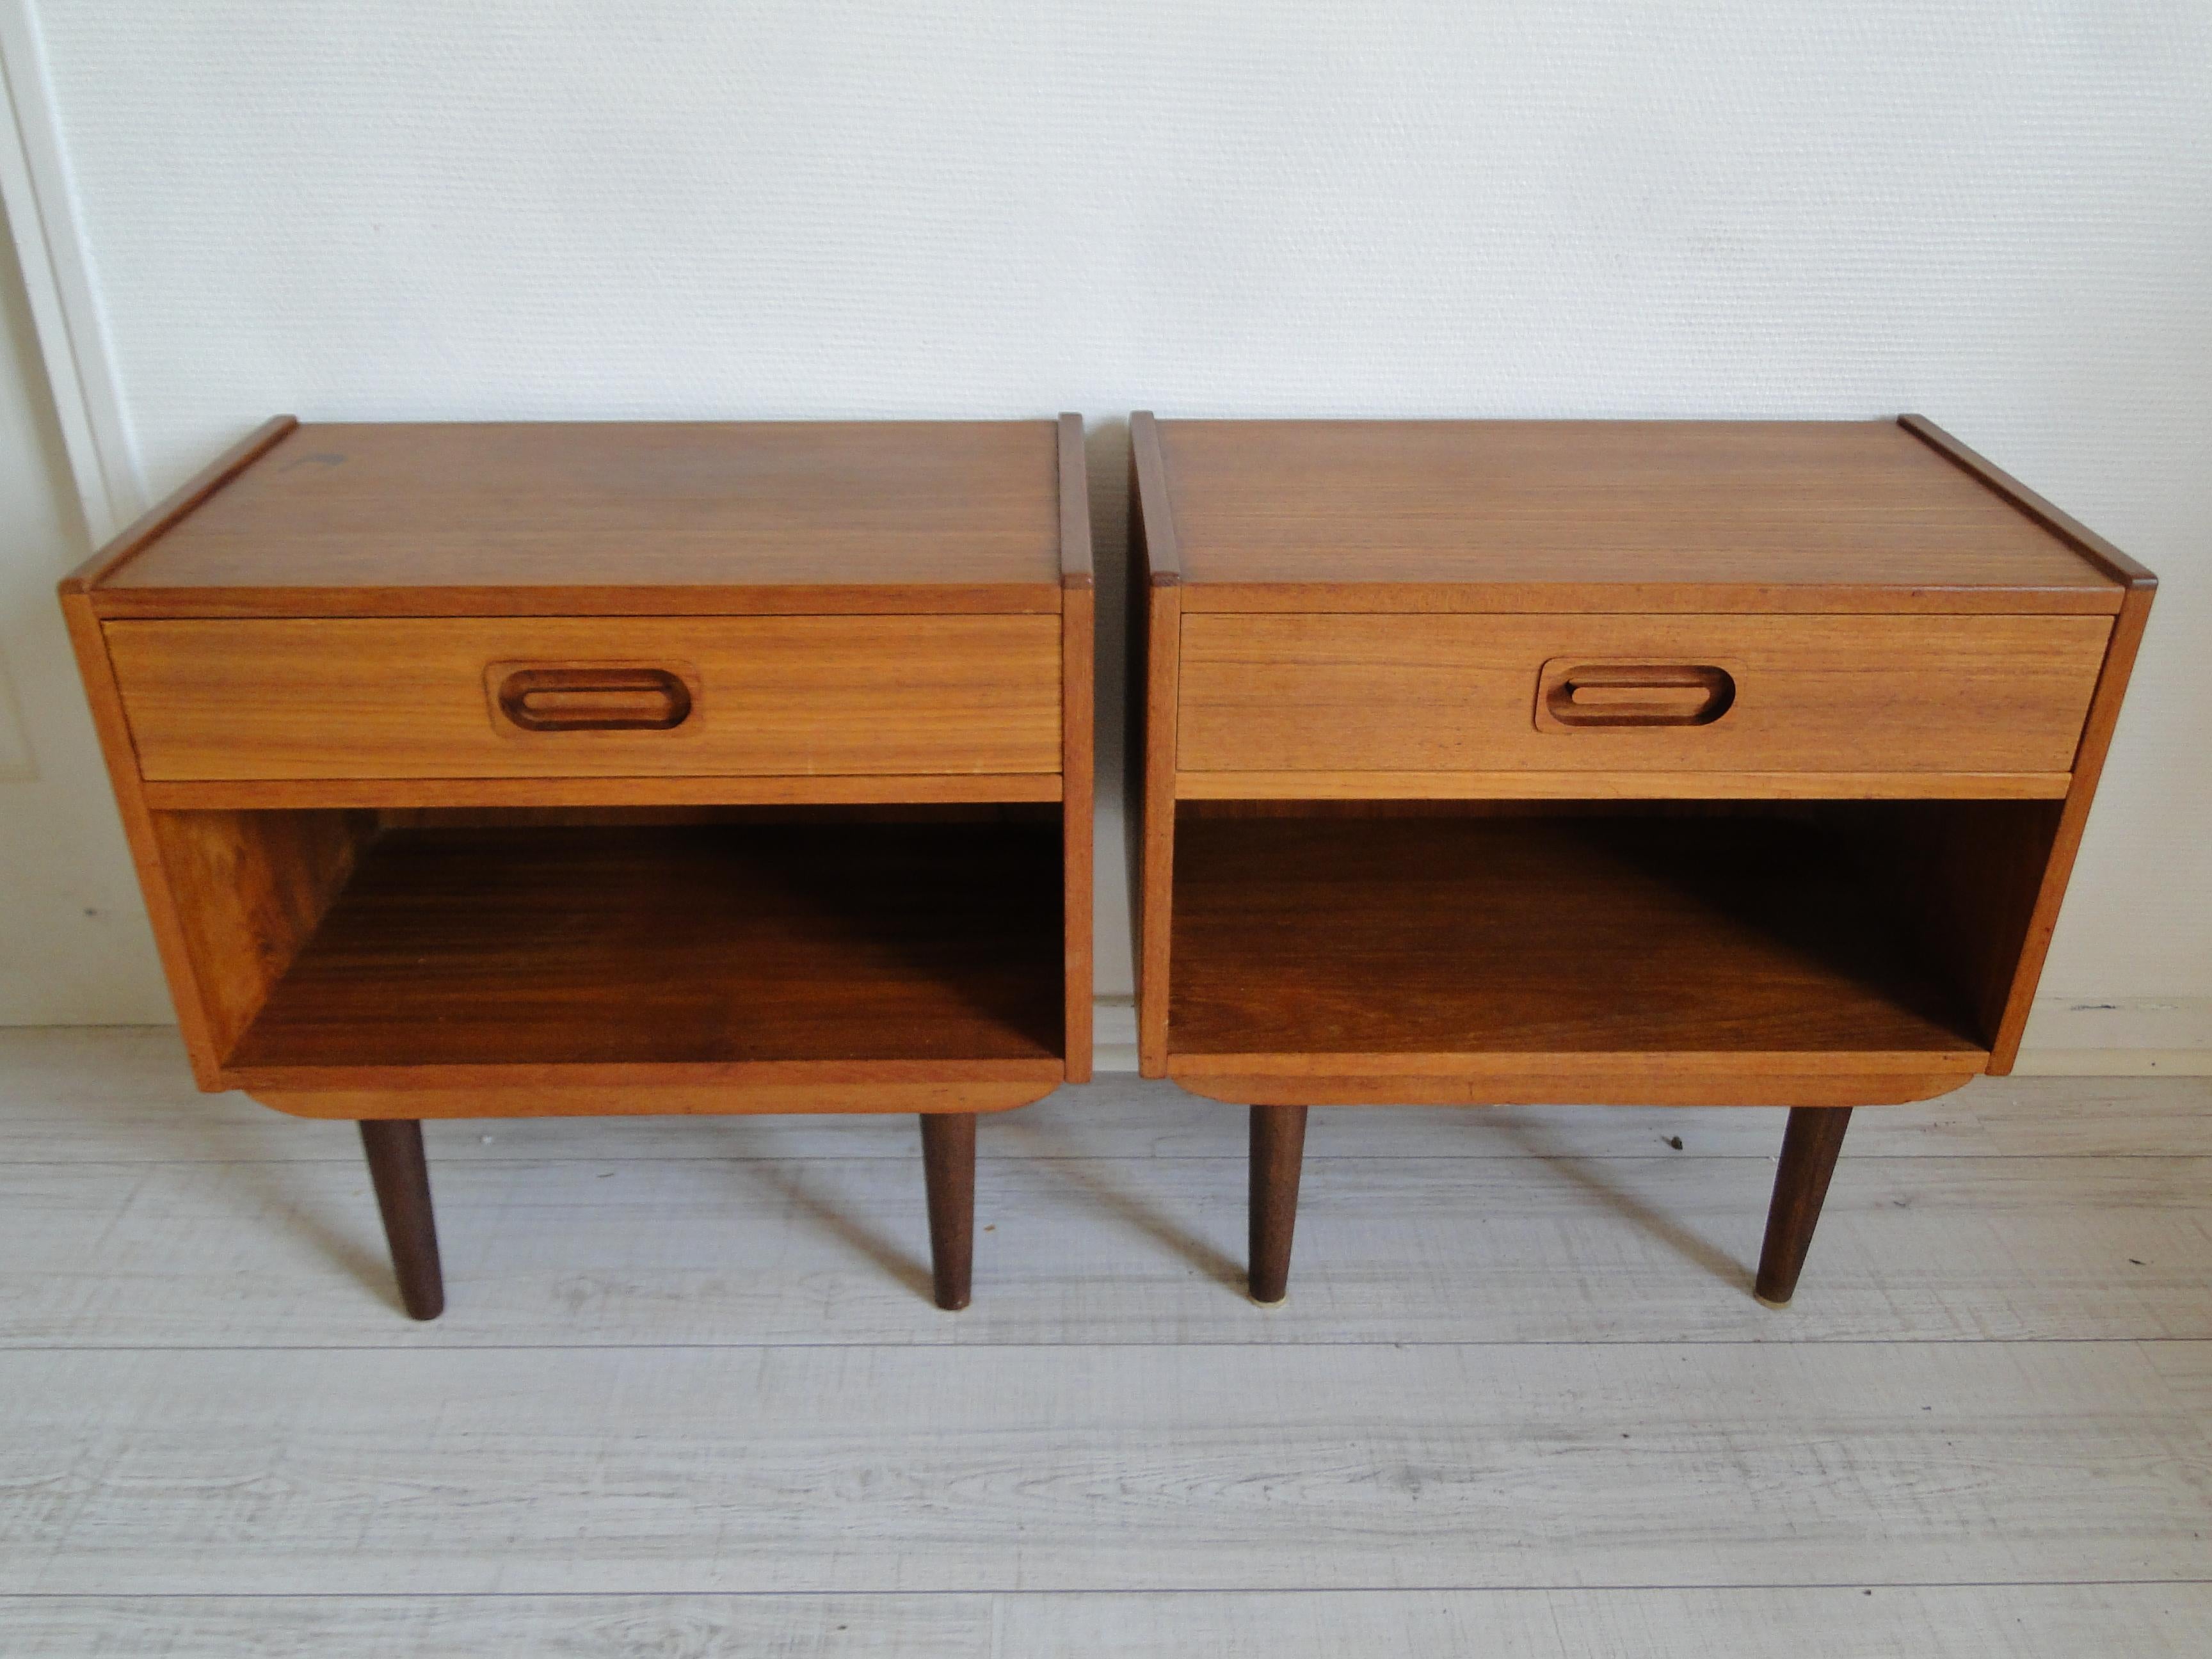 Pair of vintage teak bedside tables by Johannes Andersen for Dyrlund Denmark 1960.
Pair of teak bedside tables with a drawer and a shelf. Screw feet.

We love its soft and sober lines, the quality of the manufacture and the refined details. Minor